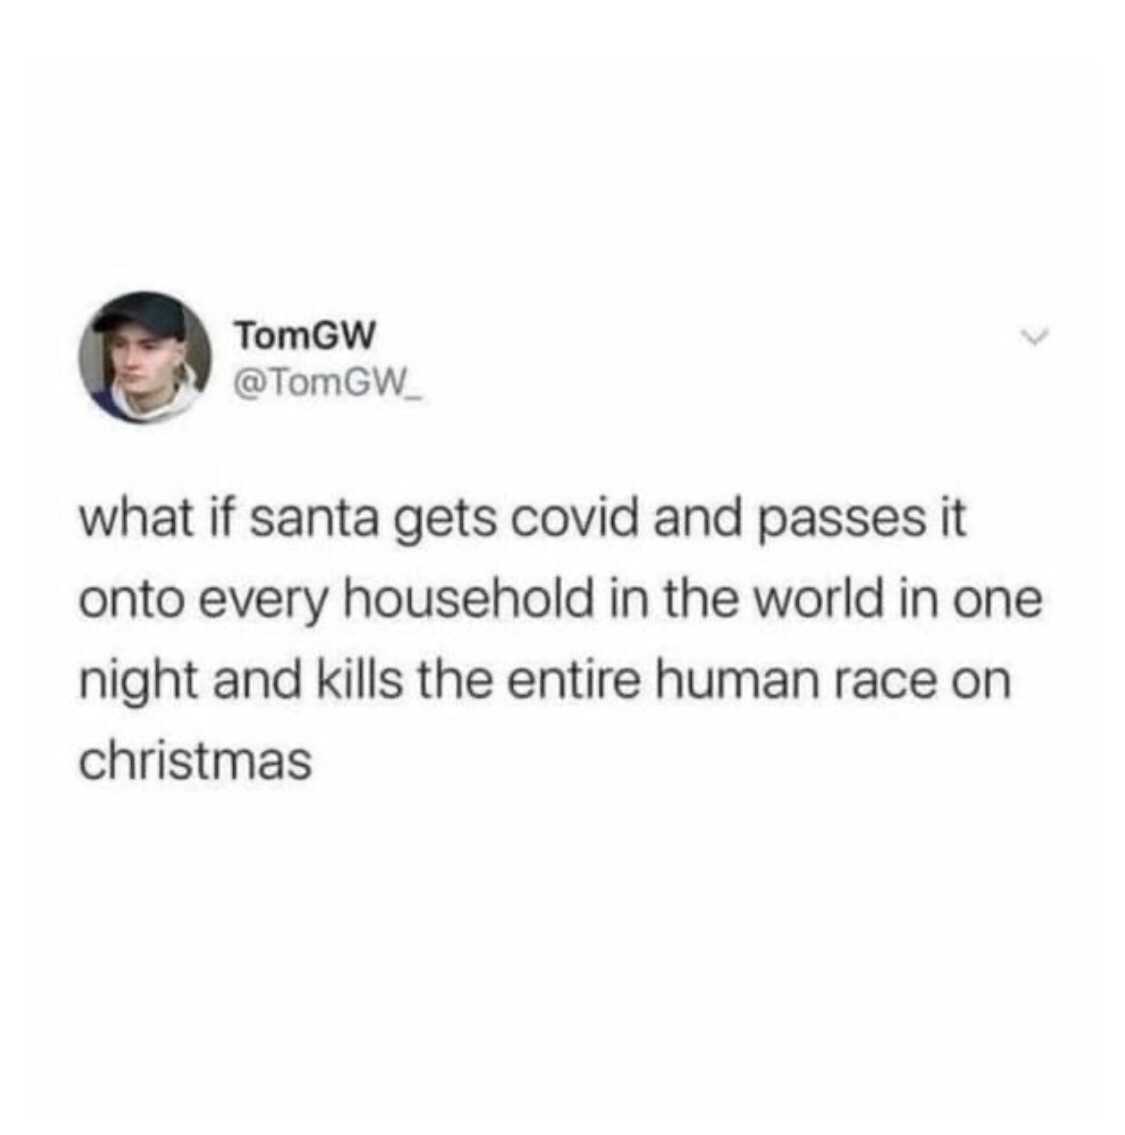 but after this week things will slow down - TomGW what if santa gets covid and passes it onto every household in the world in one night and kills the entire human race on christmas